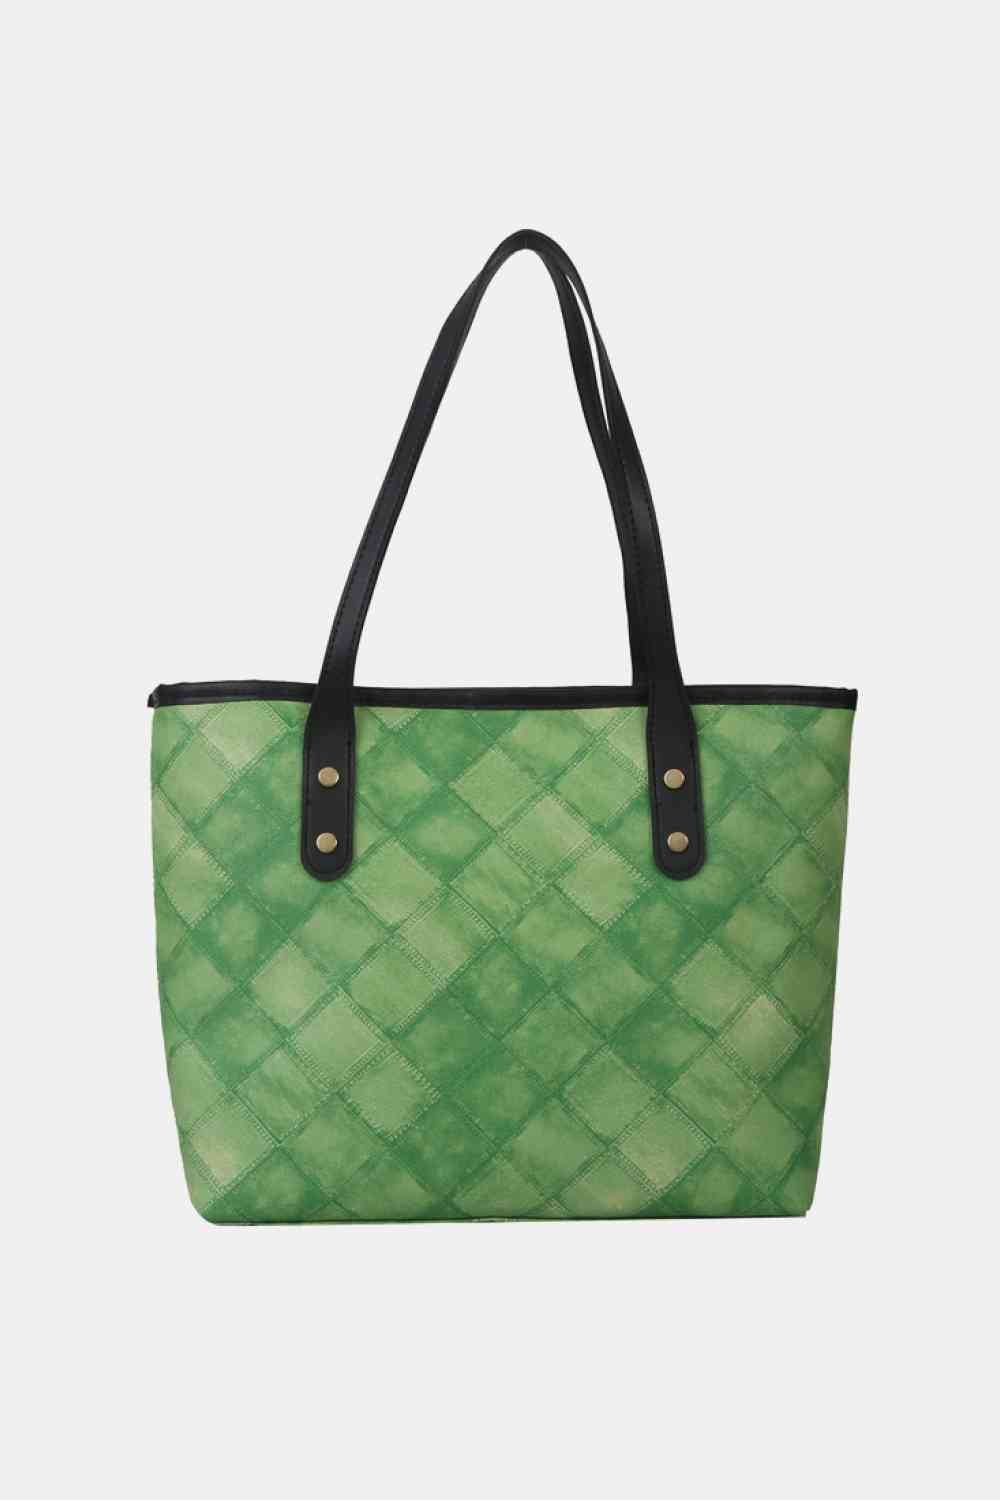 Plaid PU Leather Tote Bag - Just Enuff Sexy